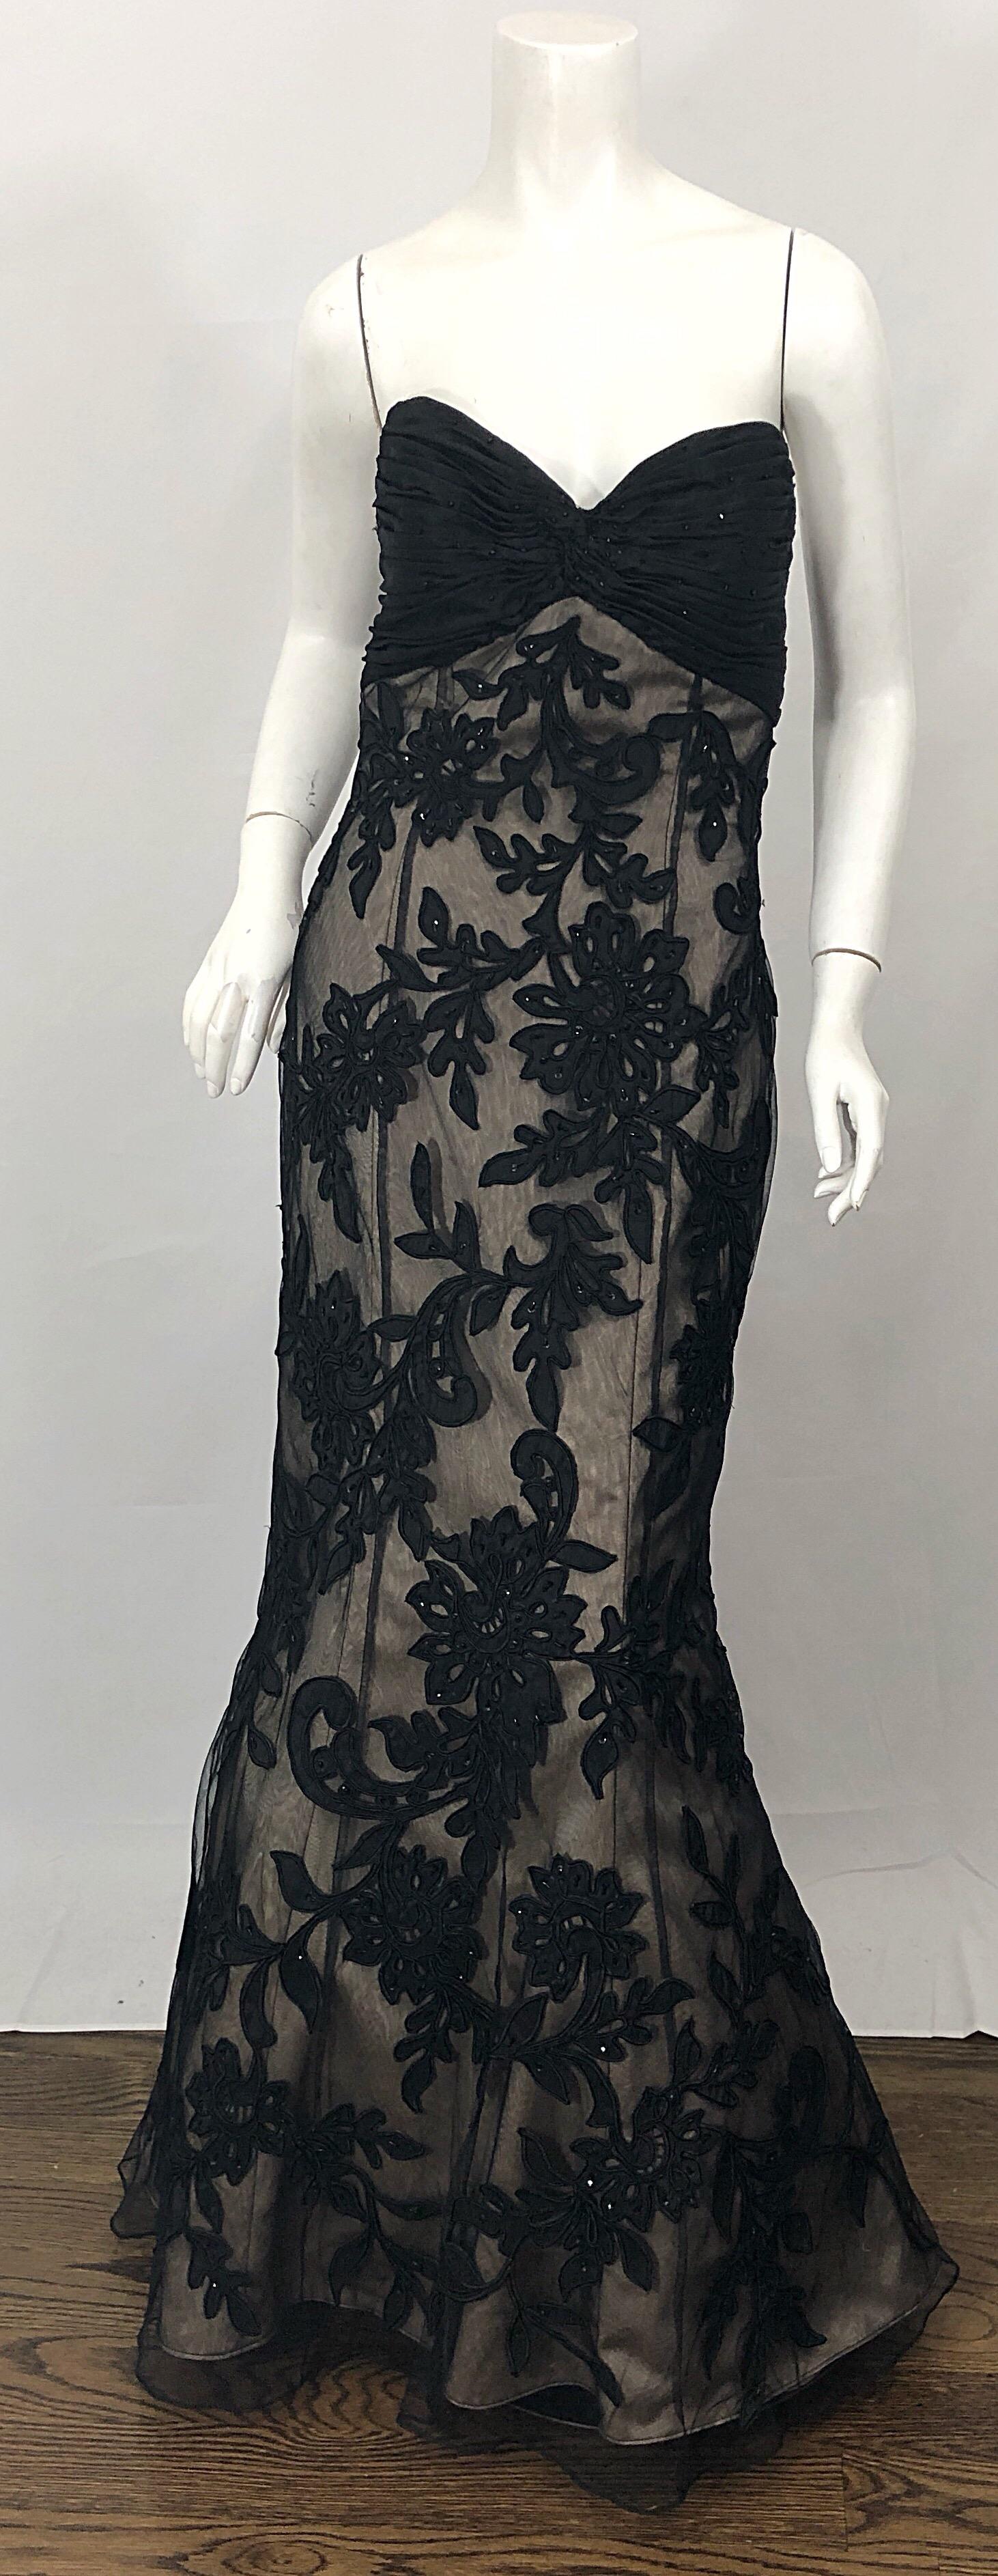 Sensational vintage BILL BLASS for SAKS 5th AVENUE black and nude silk beaded strapless mermaid gown! Features a bones ruched silk taffeta bodice. Black sheer embroidered and beaded silk lace overlay with nude silk underneath. Timeless flattering